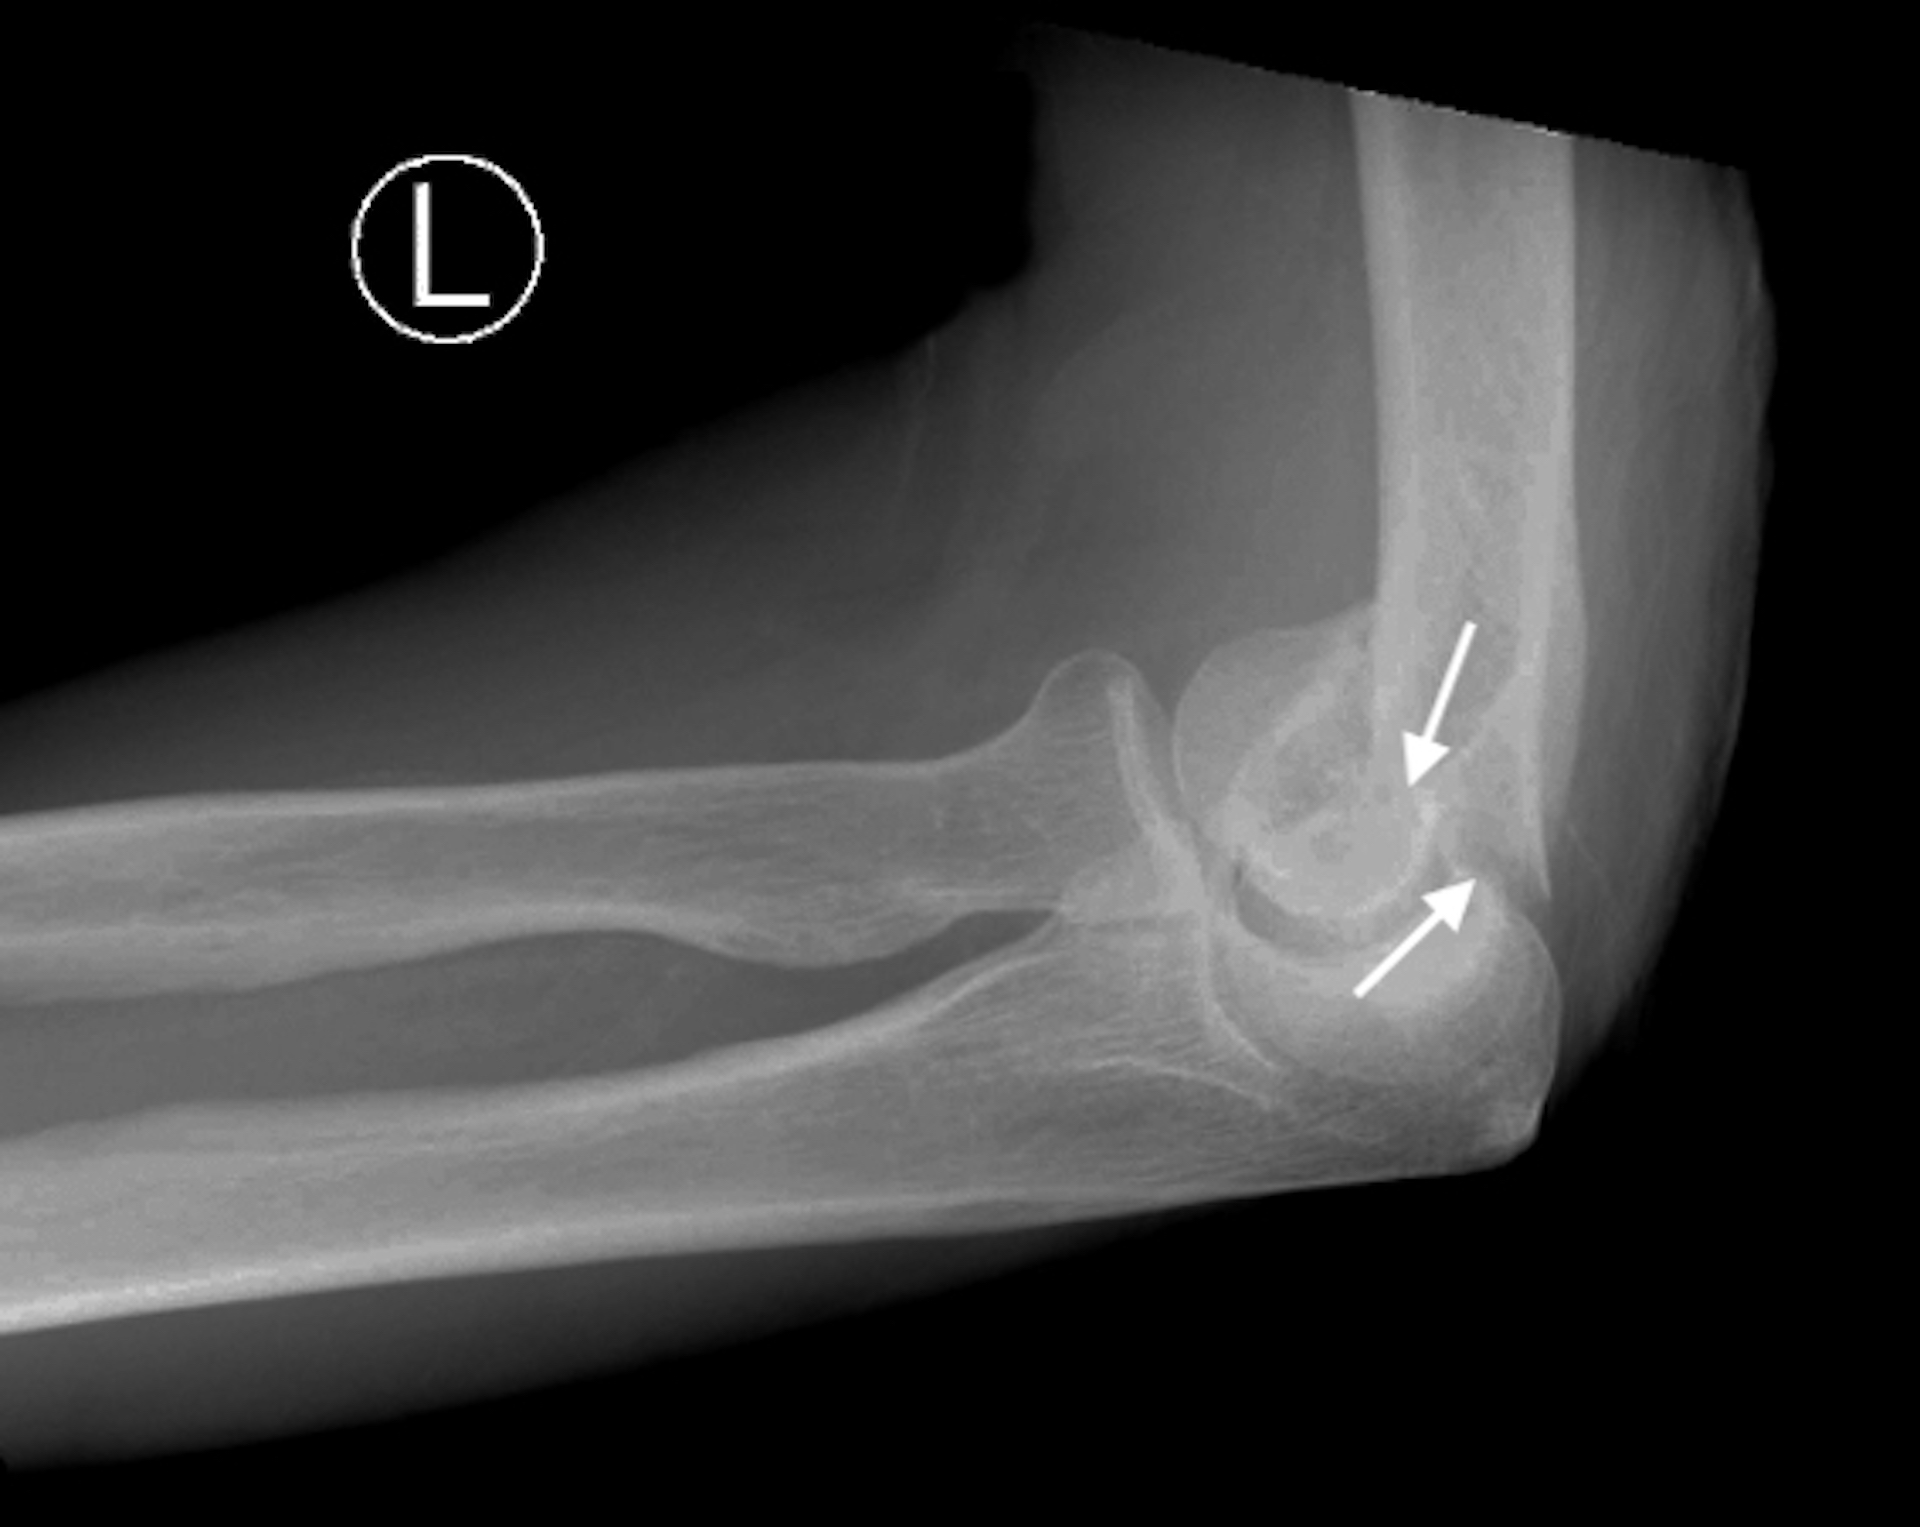 Trochlear Fracture (arrows), Lateral X-ray, as part of a distal humerus fracture